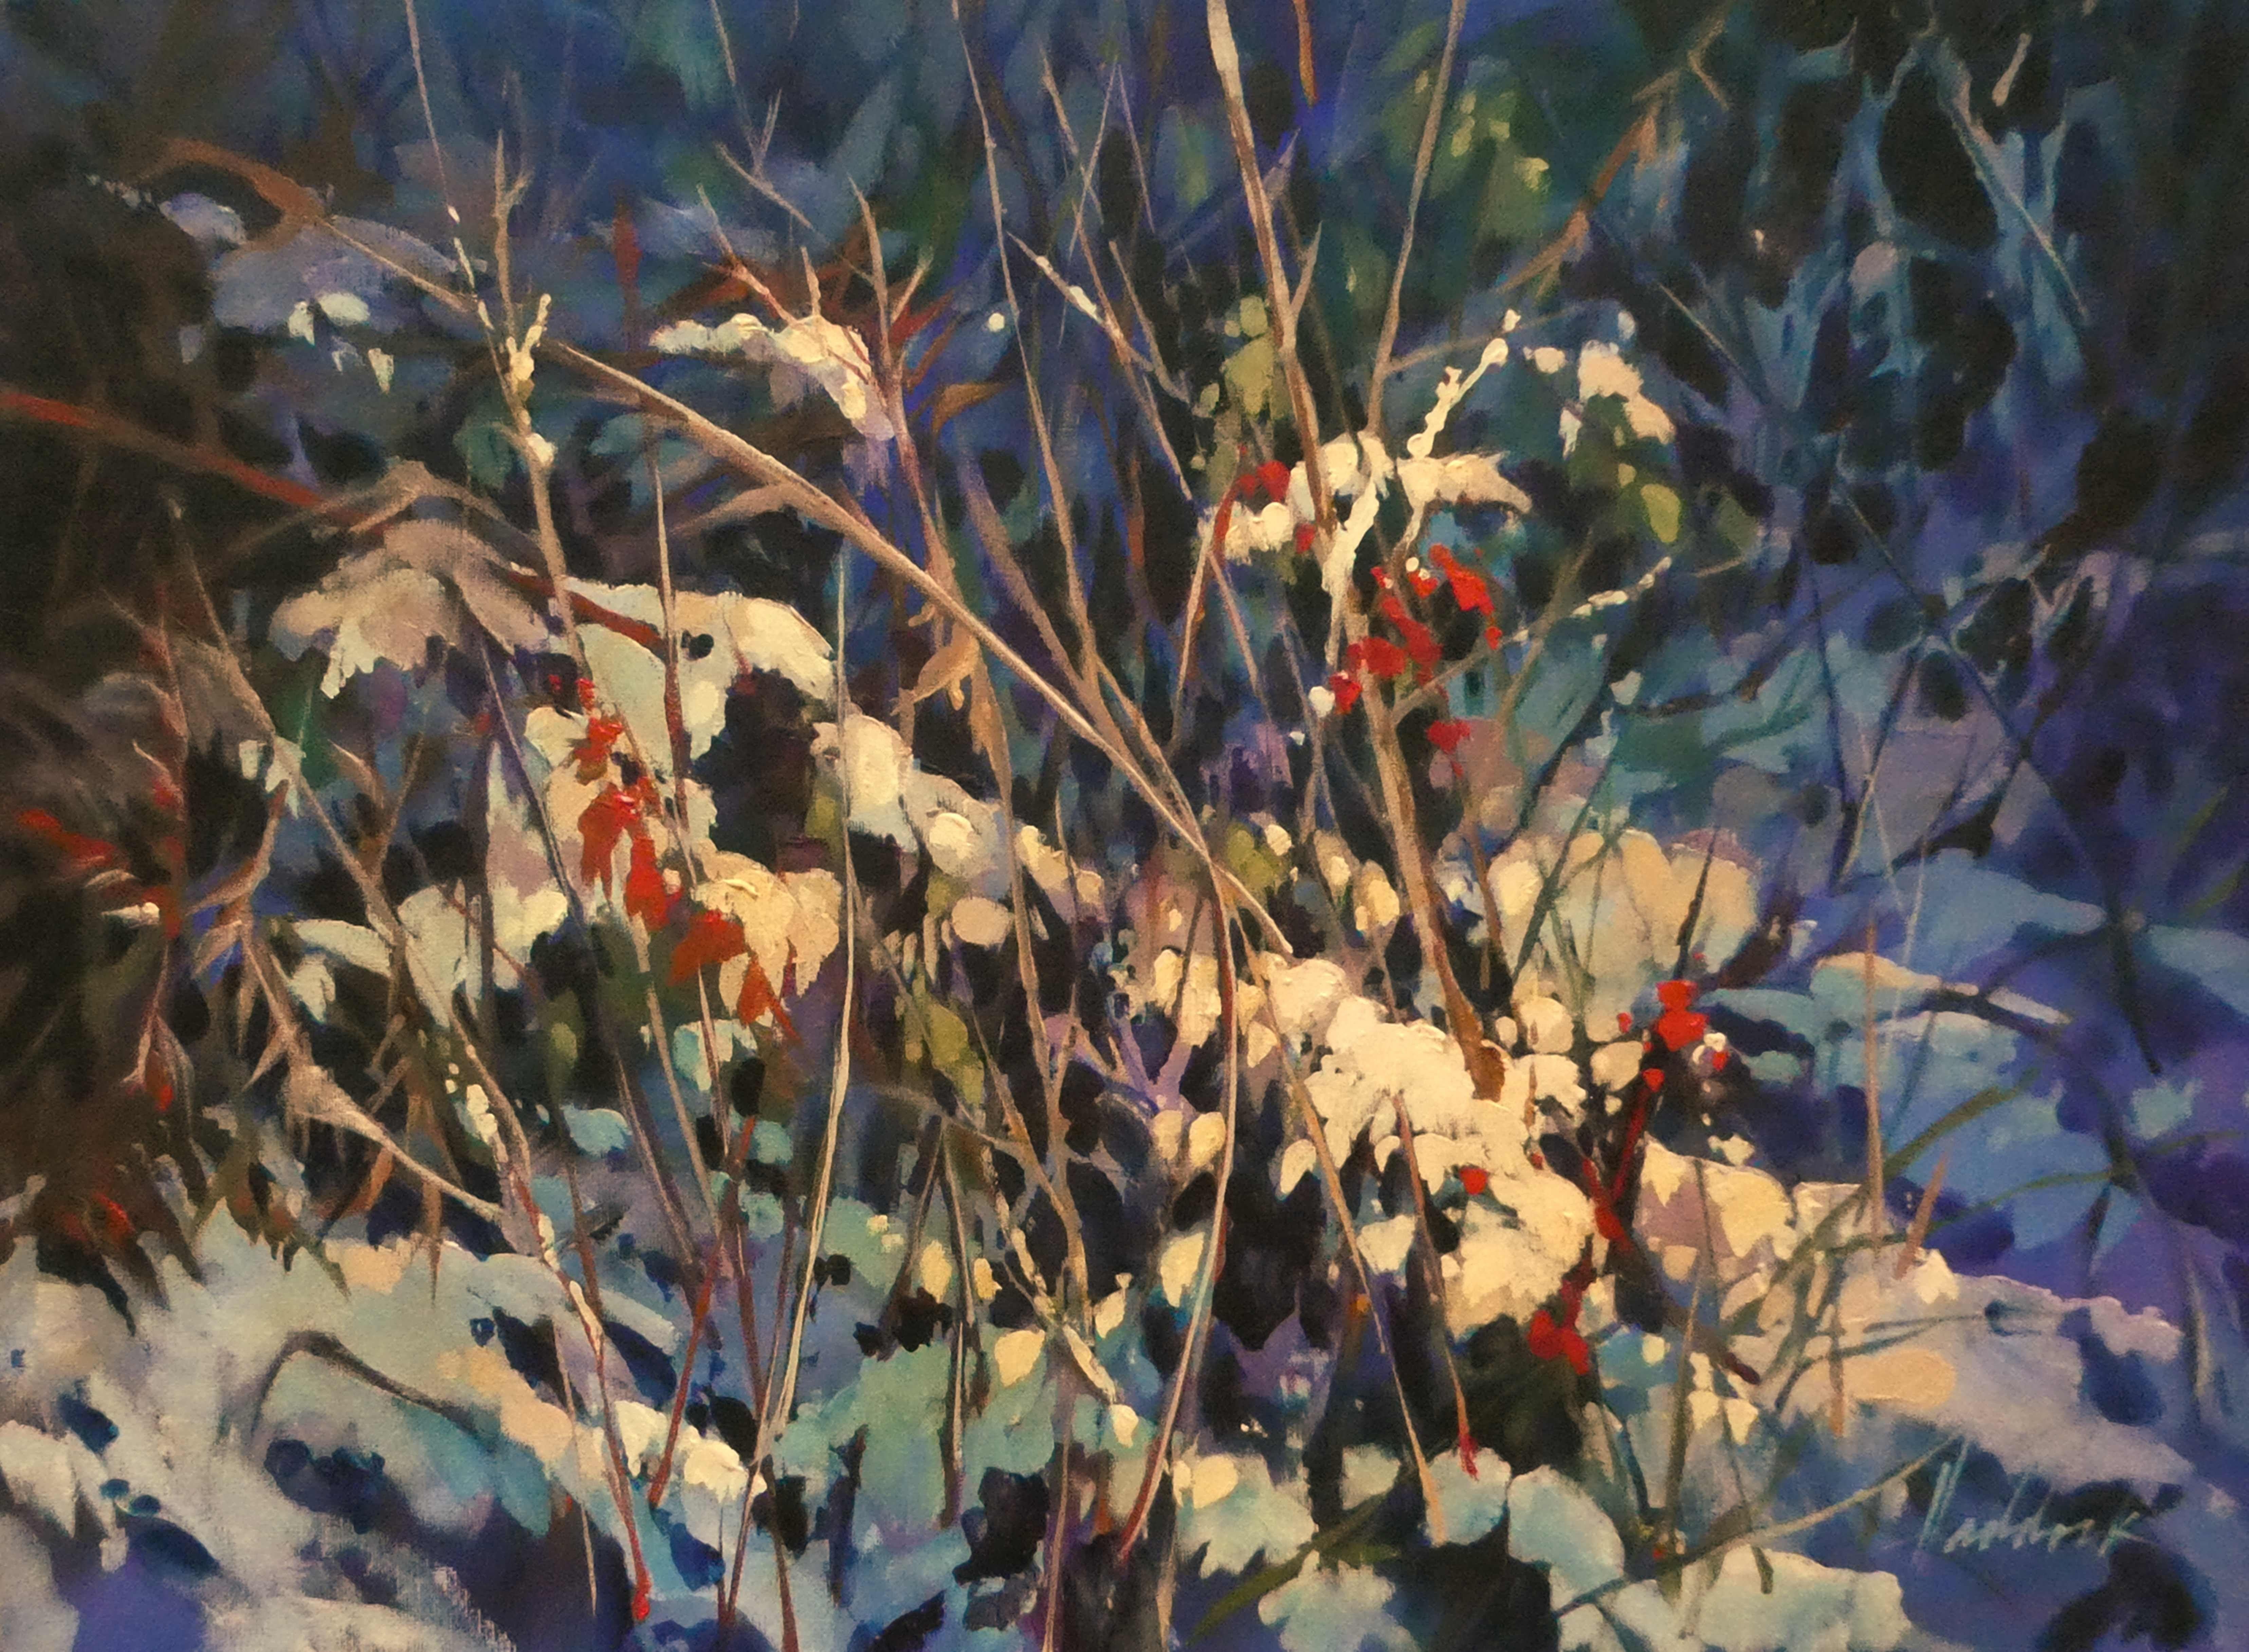 Jewels of snow cling to autumn grasses in a nature-inspired abstract pattern. The painting is protected from dust and Ultra violet light by a professional quality artist varnish.   :: Painting :: Impressionist :: This piece comes with an official